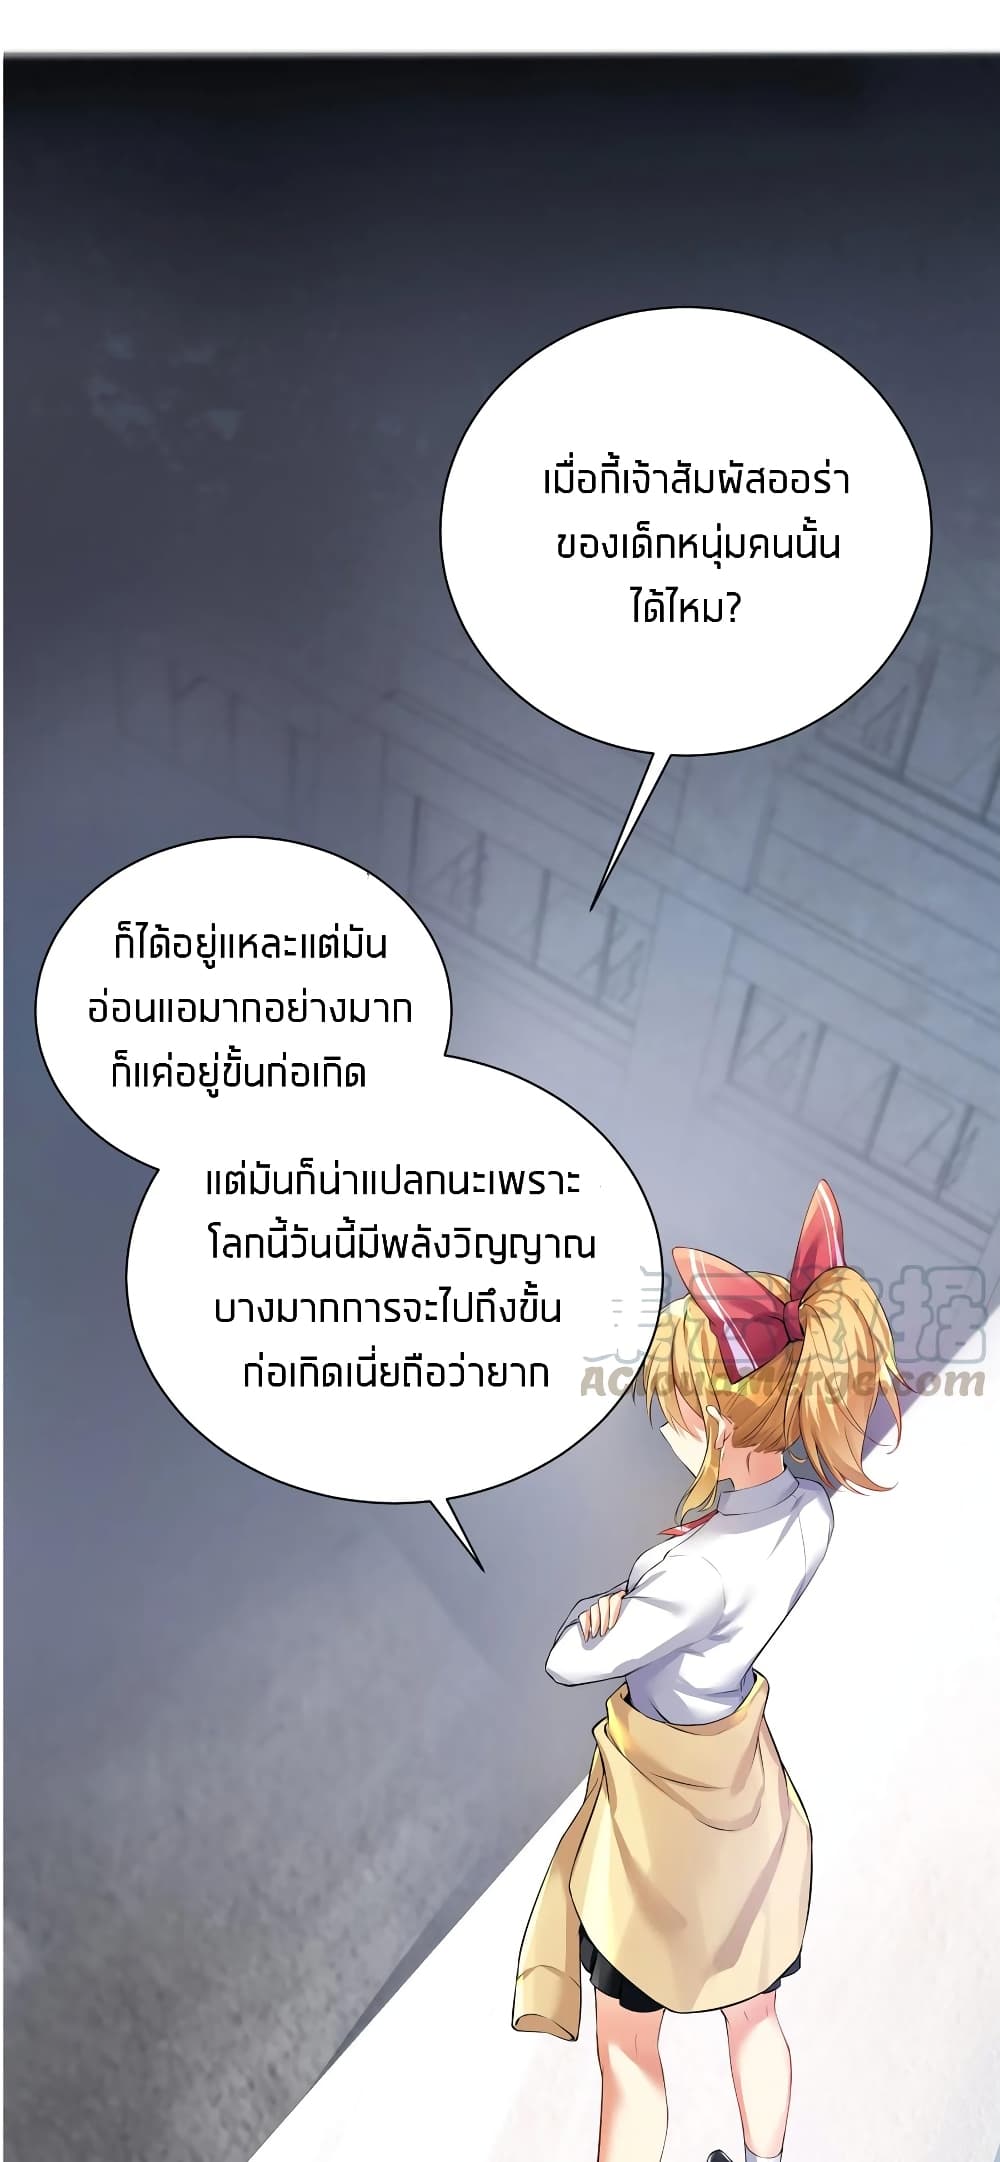 What Happended? Why I become to Girl? - หน้า 21